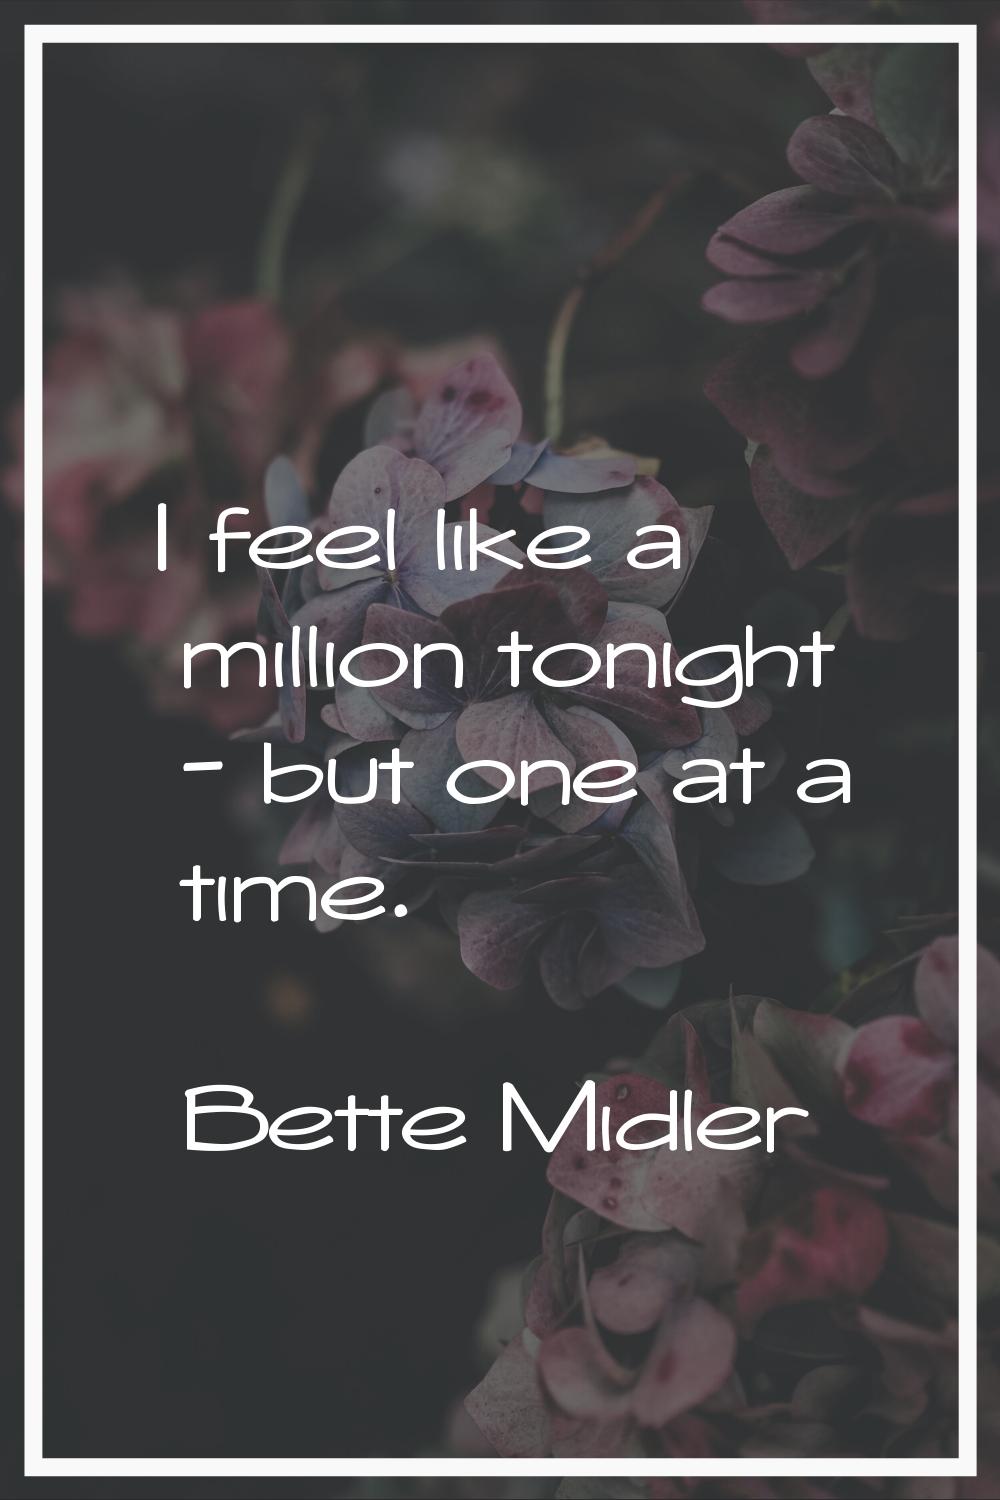 I feel like a million tonight - but one at a time.